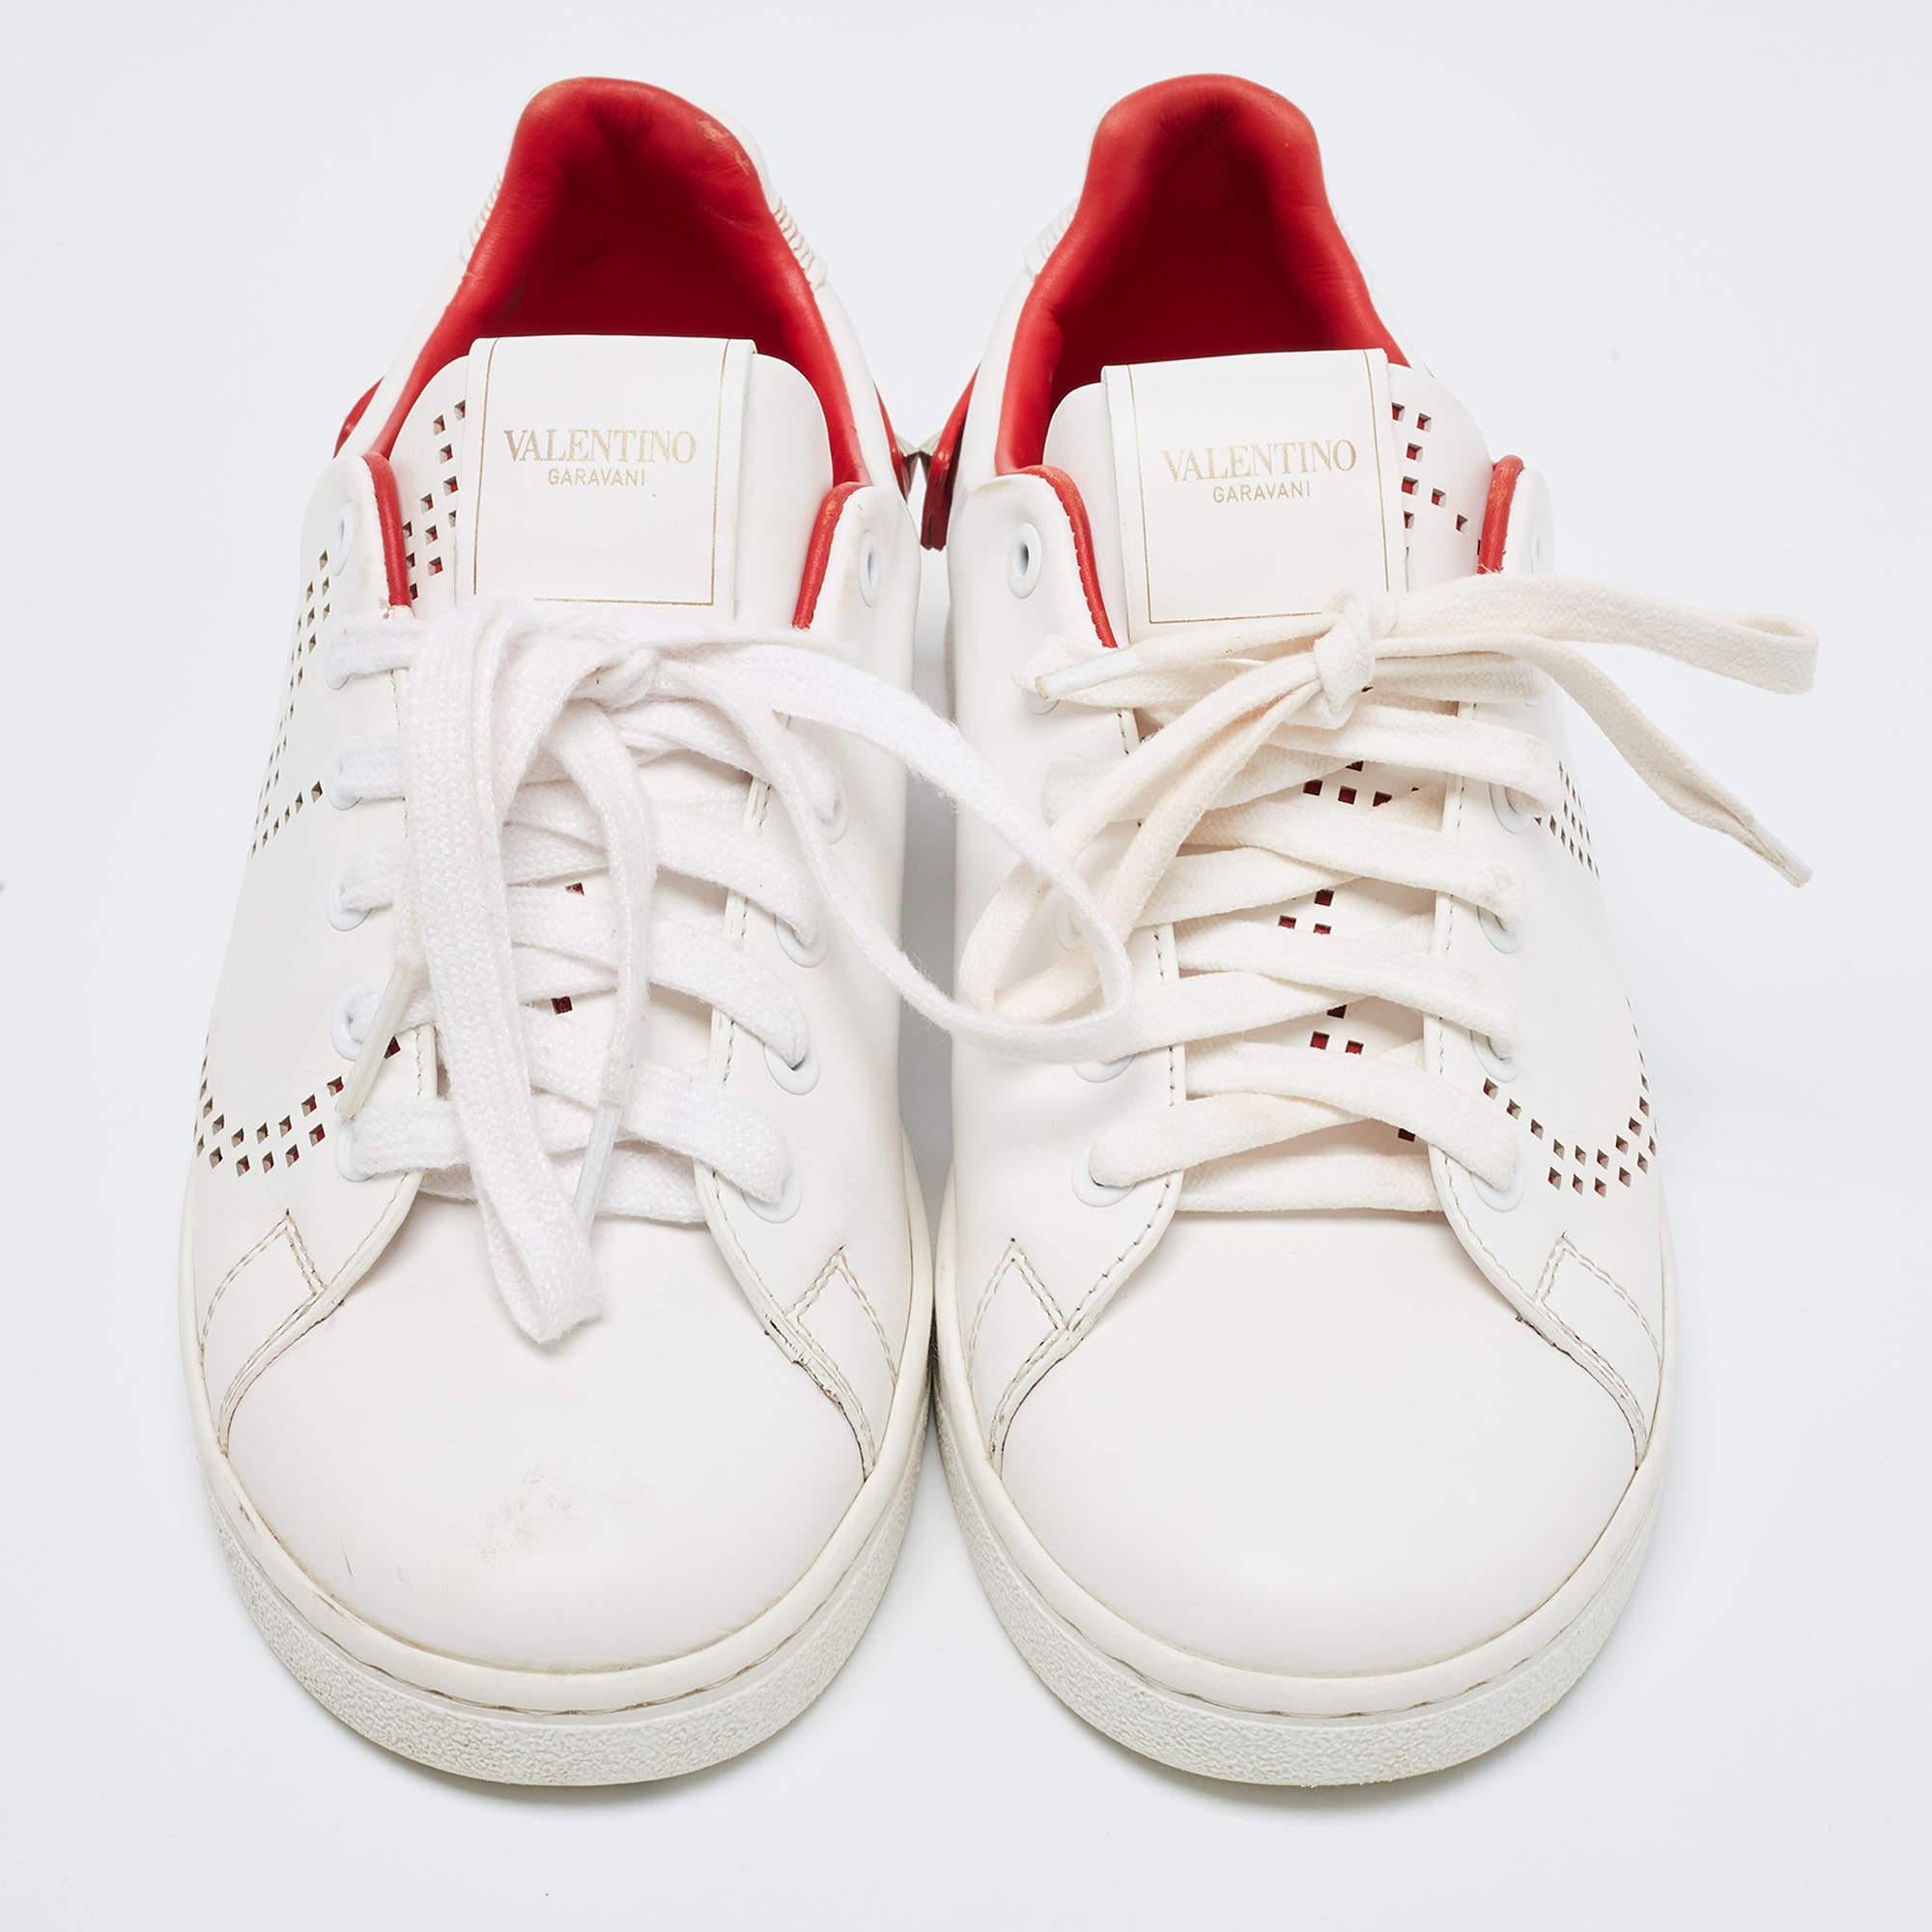 These Valentino sneakers represent the idea of comfortable fashion. They are crafted from high-quality materials and designed with nothing but style. A perfect fit for all casual occasions, these sneakers will spruce up any look effortlessly.

